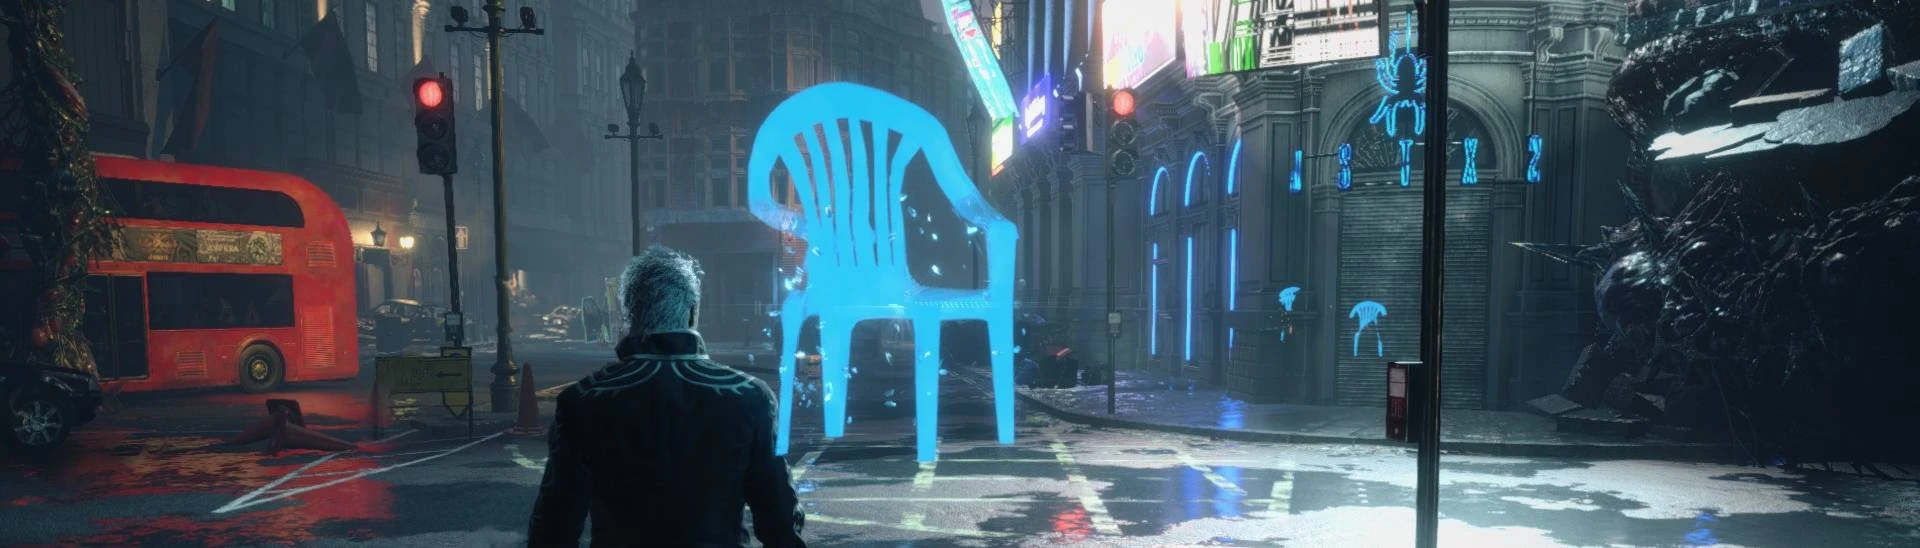 Vergil Summoned Chairs - Devil May Cry 5 [MOD], Vergil Summoned Chairs -  Devil May Cry 5 [MOD] Credit Mod by RyukoDN  -----------------------------------------------------------------------------, By World Mods